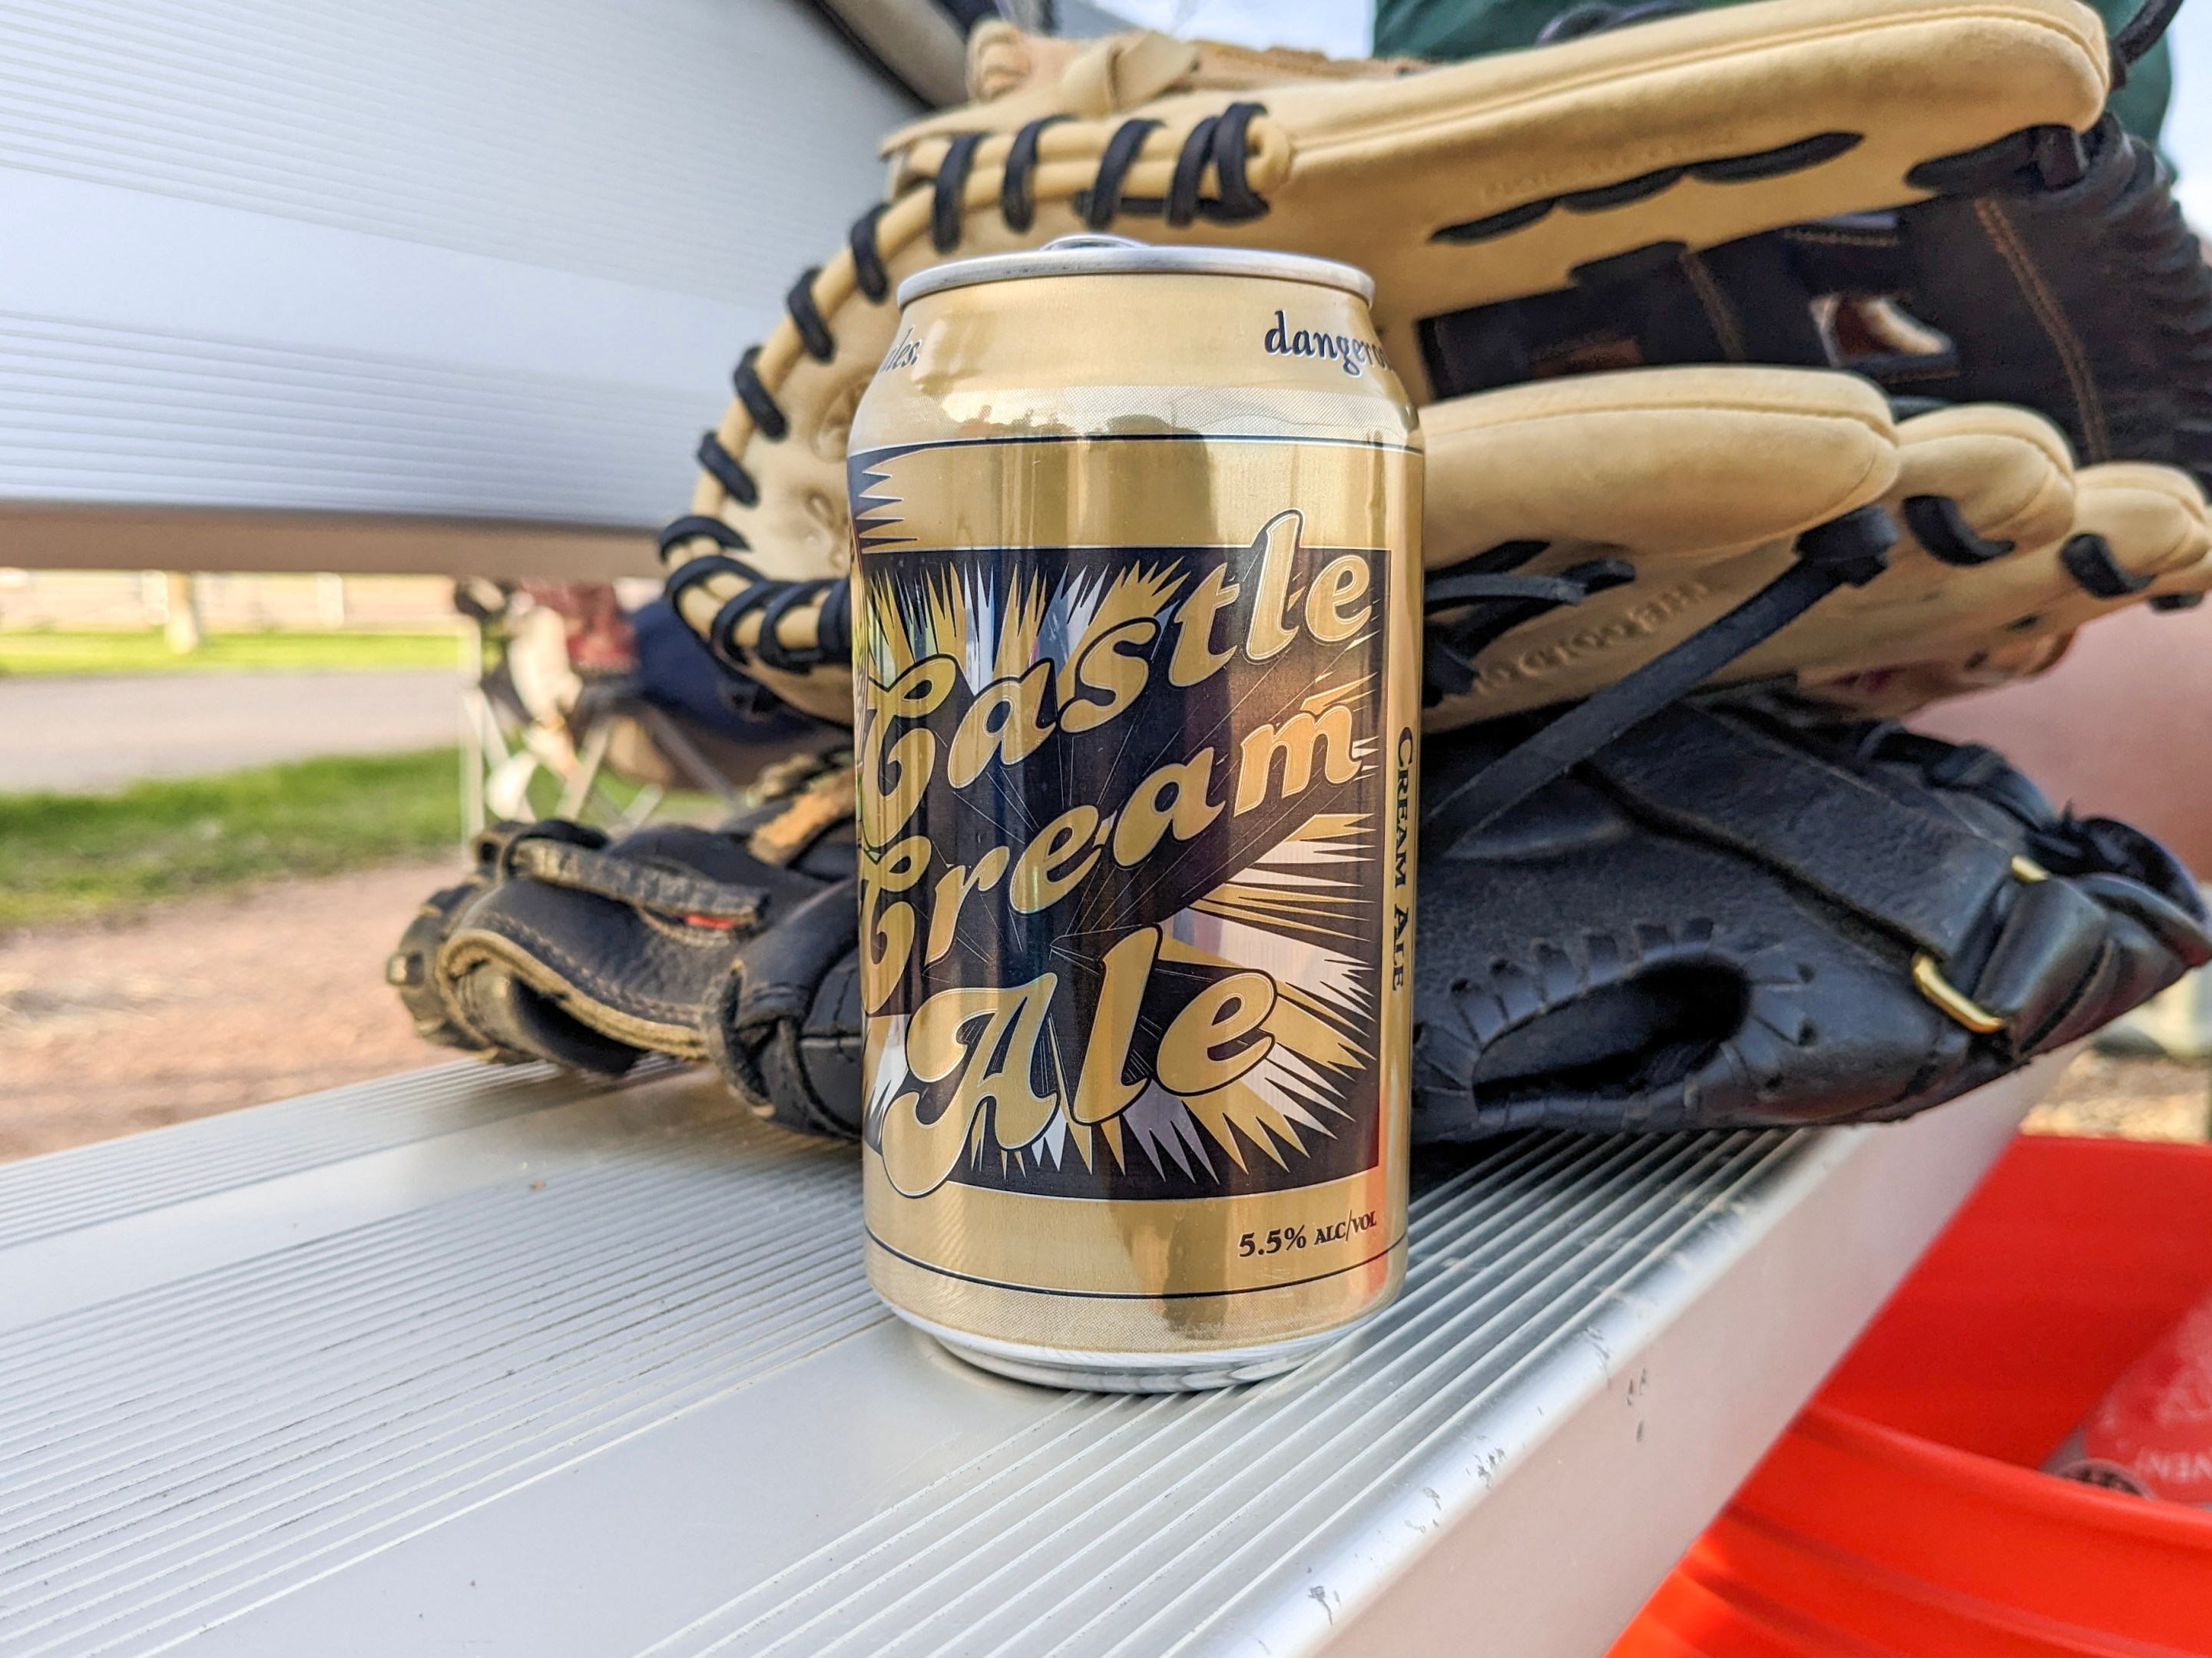 A golden can of cream ale sits on a metal bleacher in front of some softball gloves